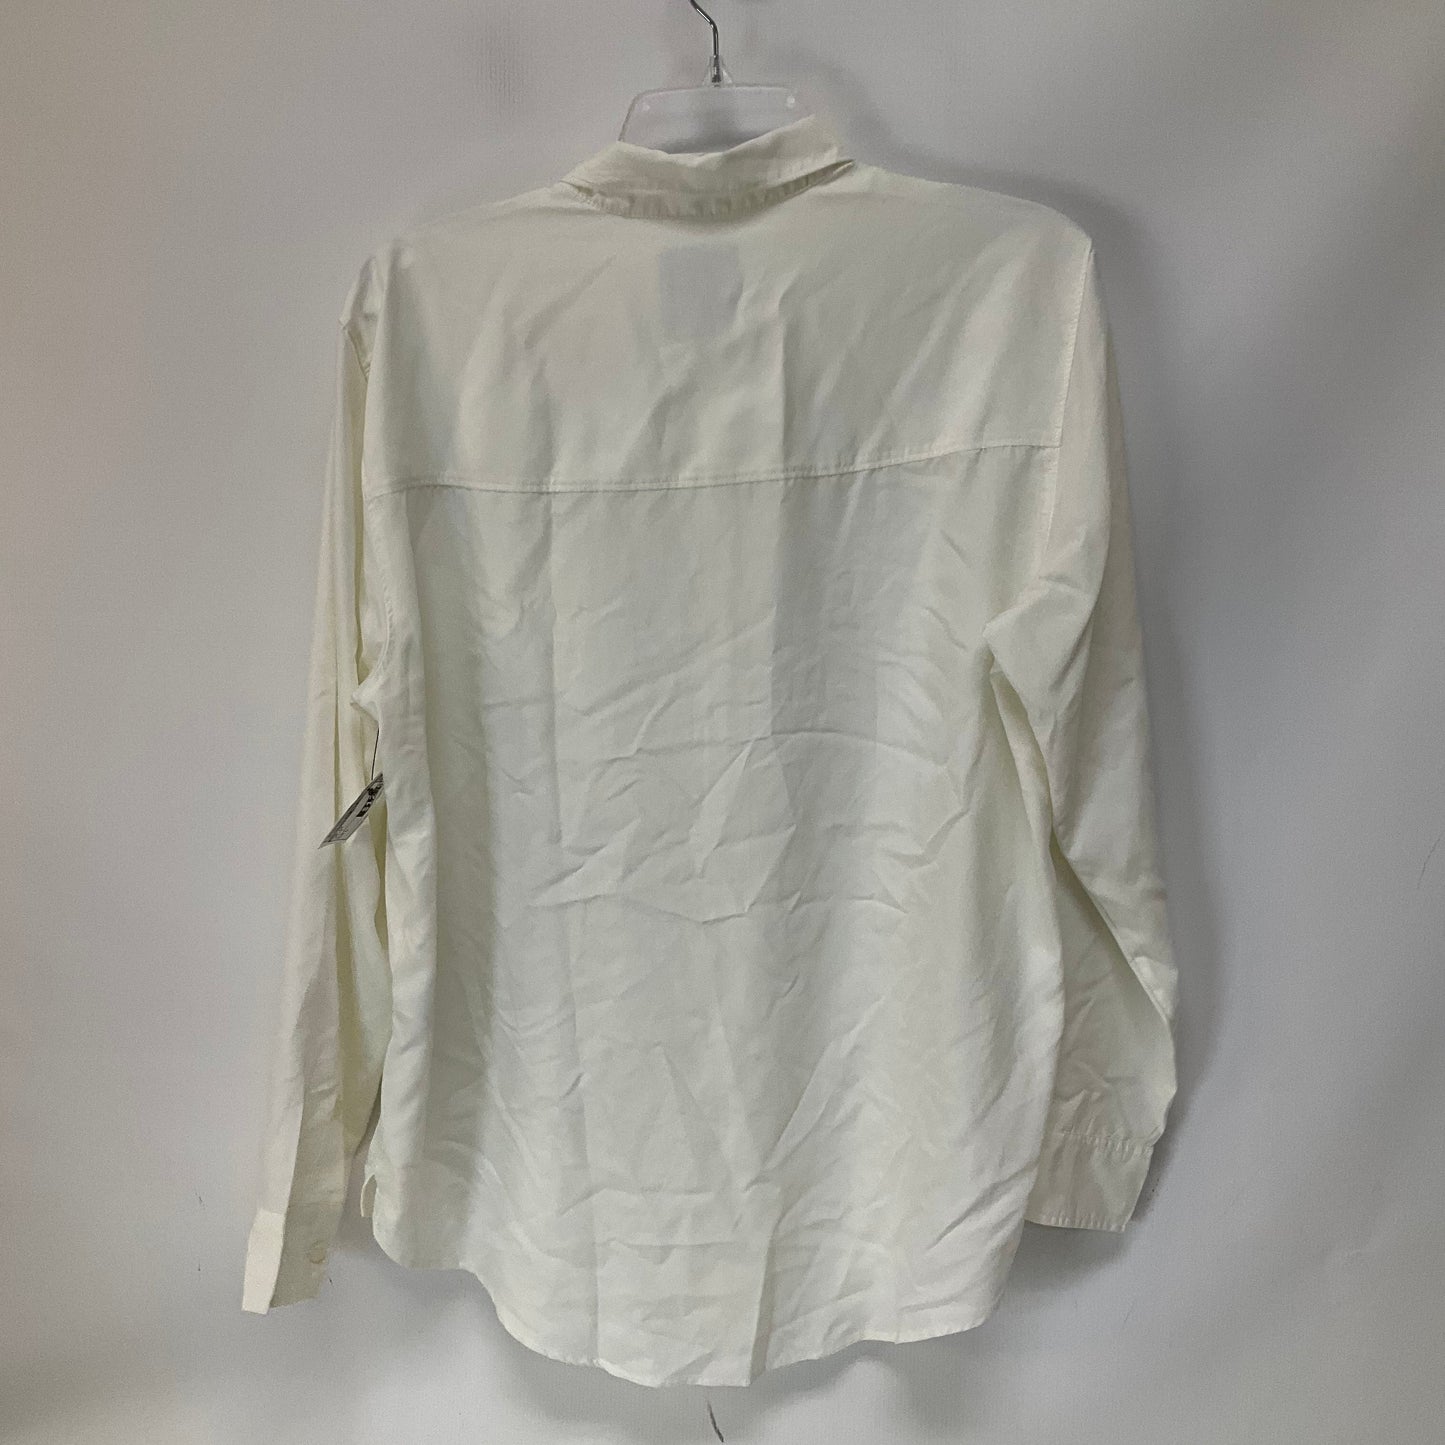 White Top Long Sleeve Abercrombie And Fitch, Size L